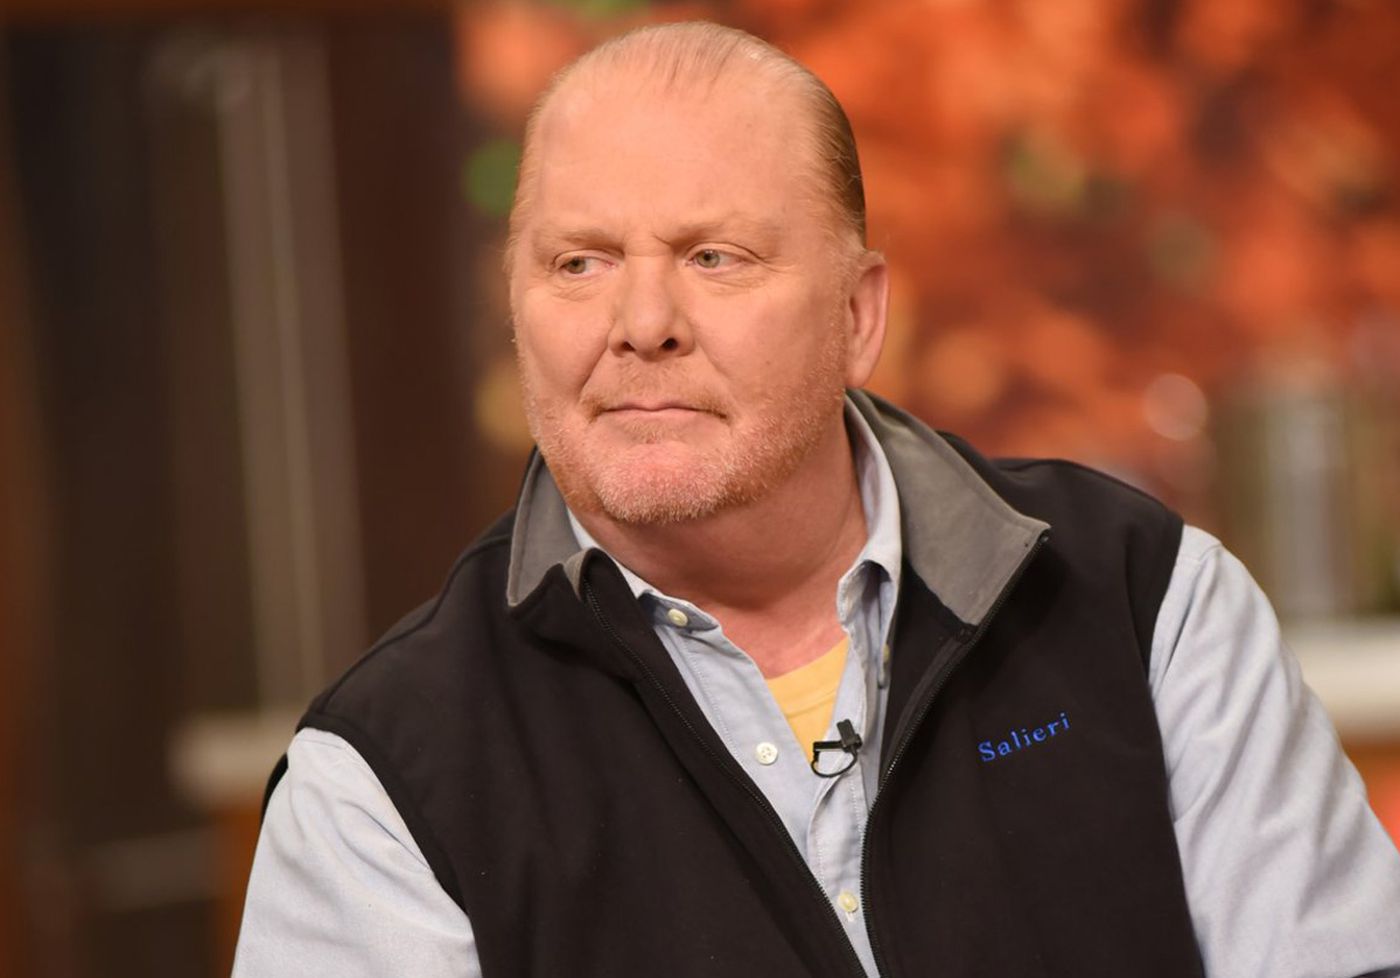 Chef Mario Batali being investigated over sexual assault accusations